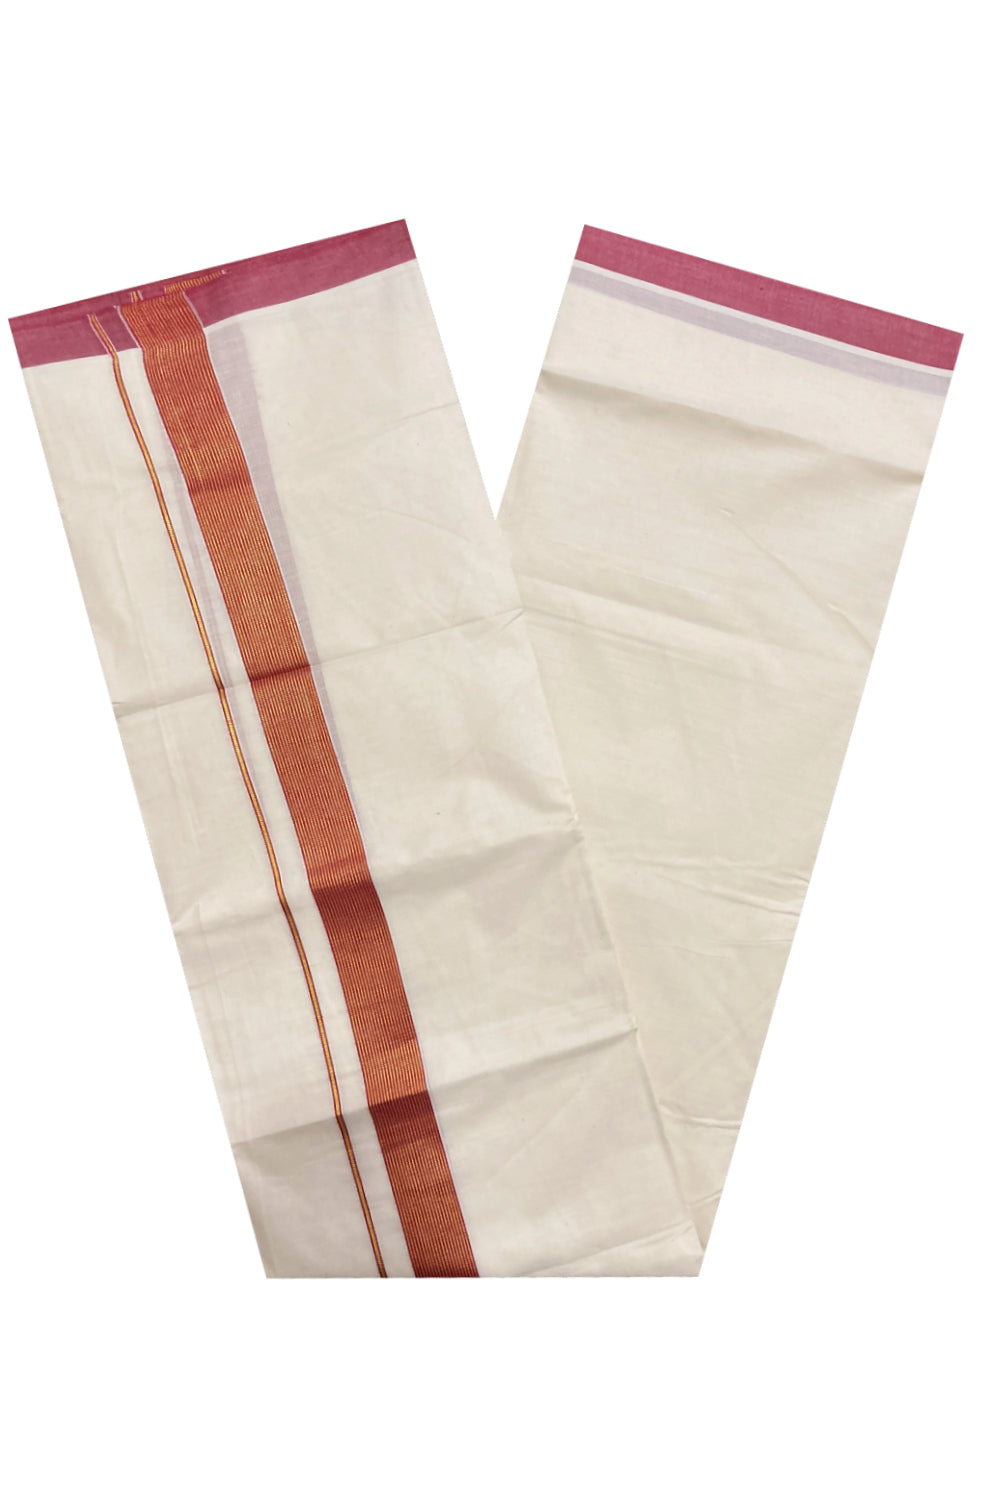 Off White Kerala Double Mundu with Kasavu and Dark Red Line Border (South Indian Dhoti)